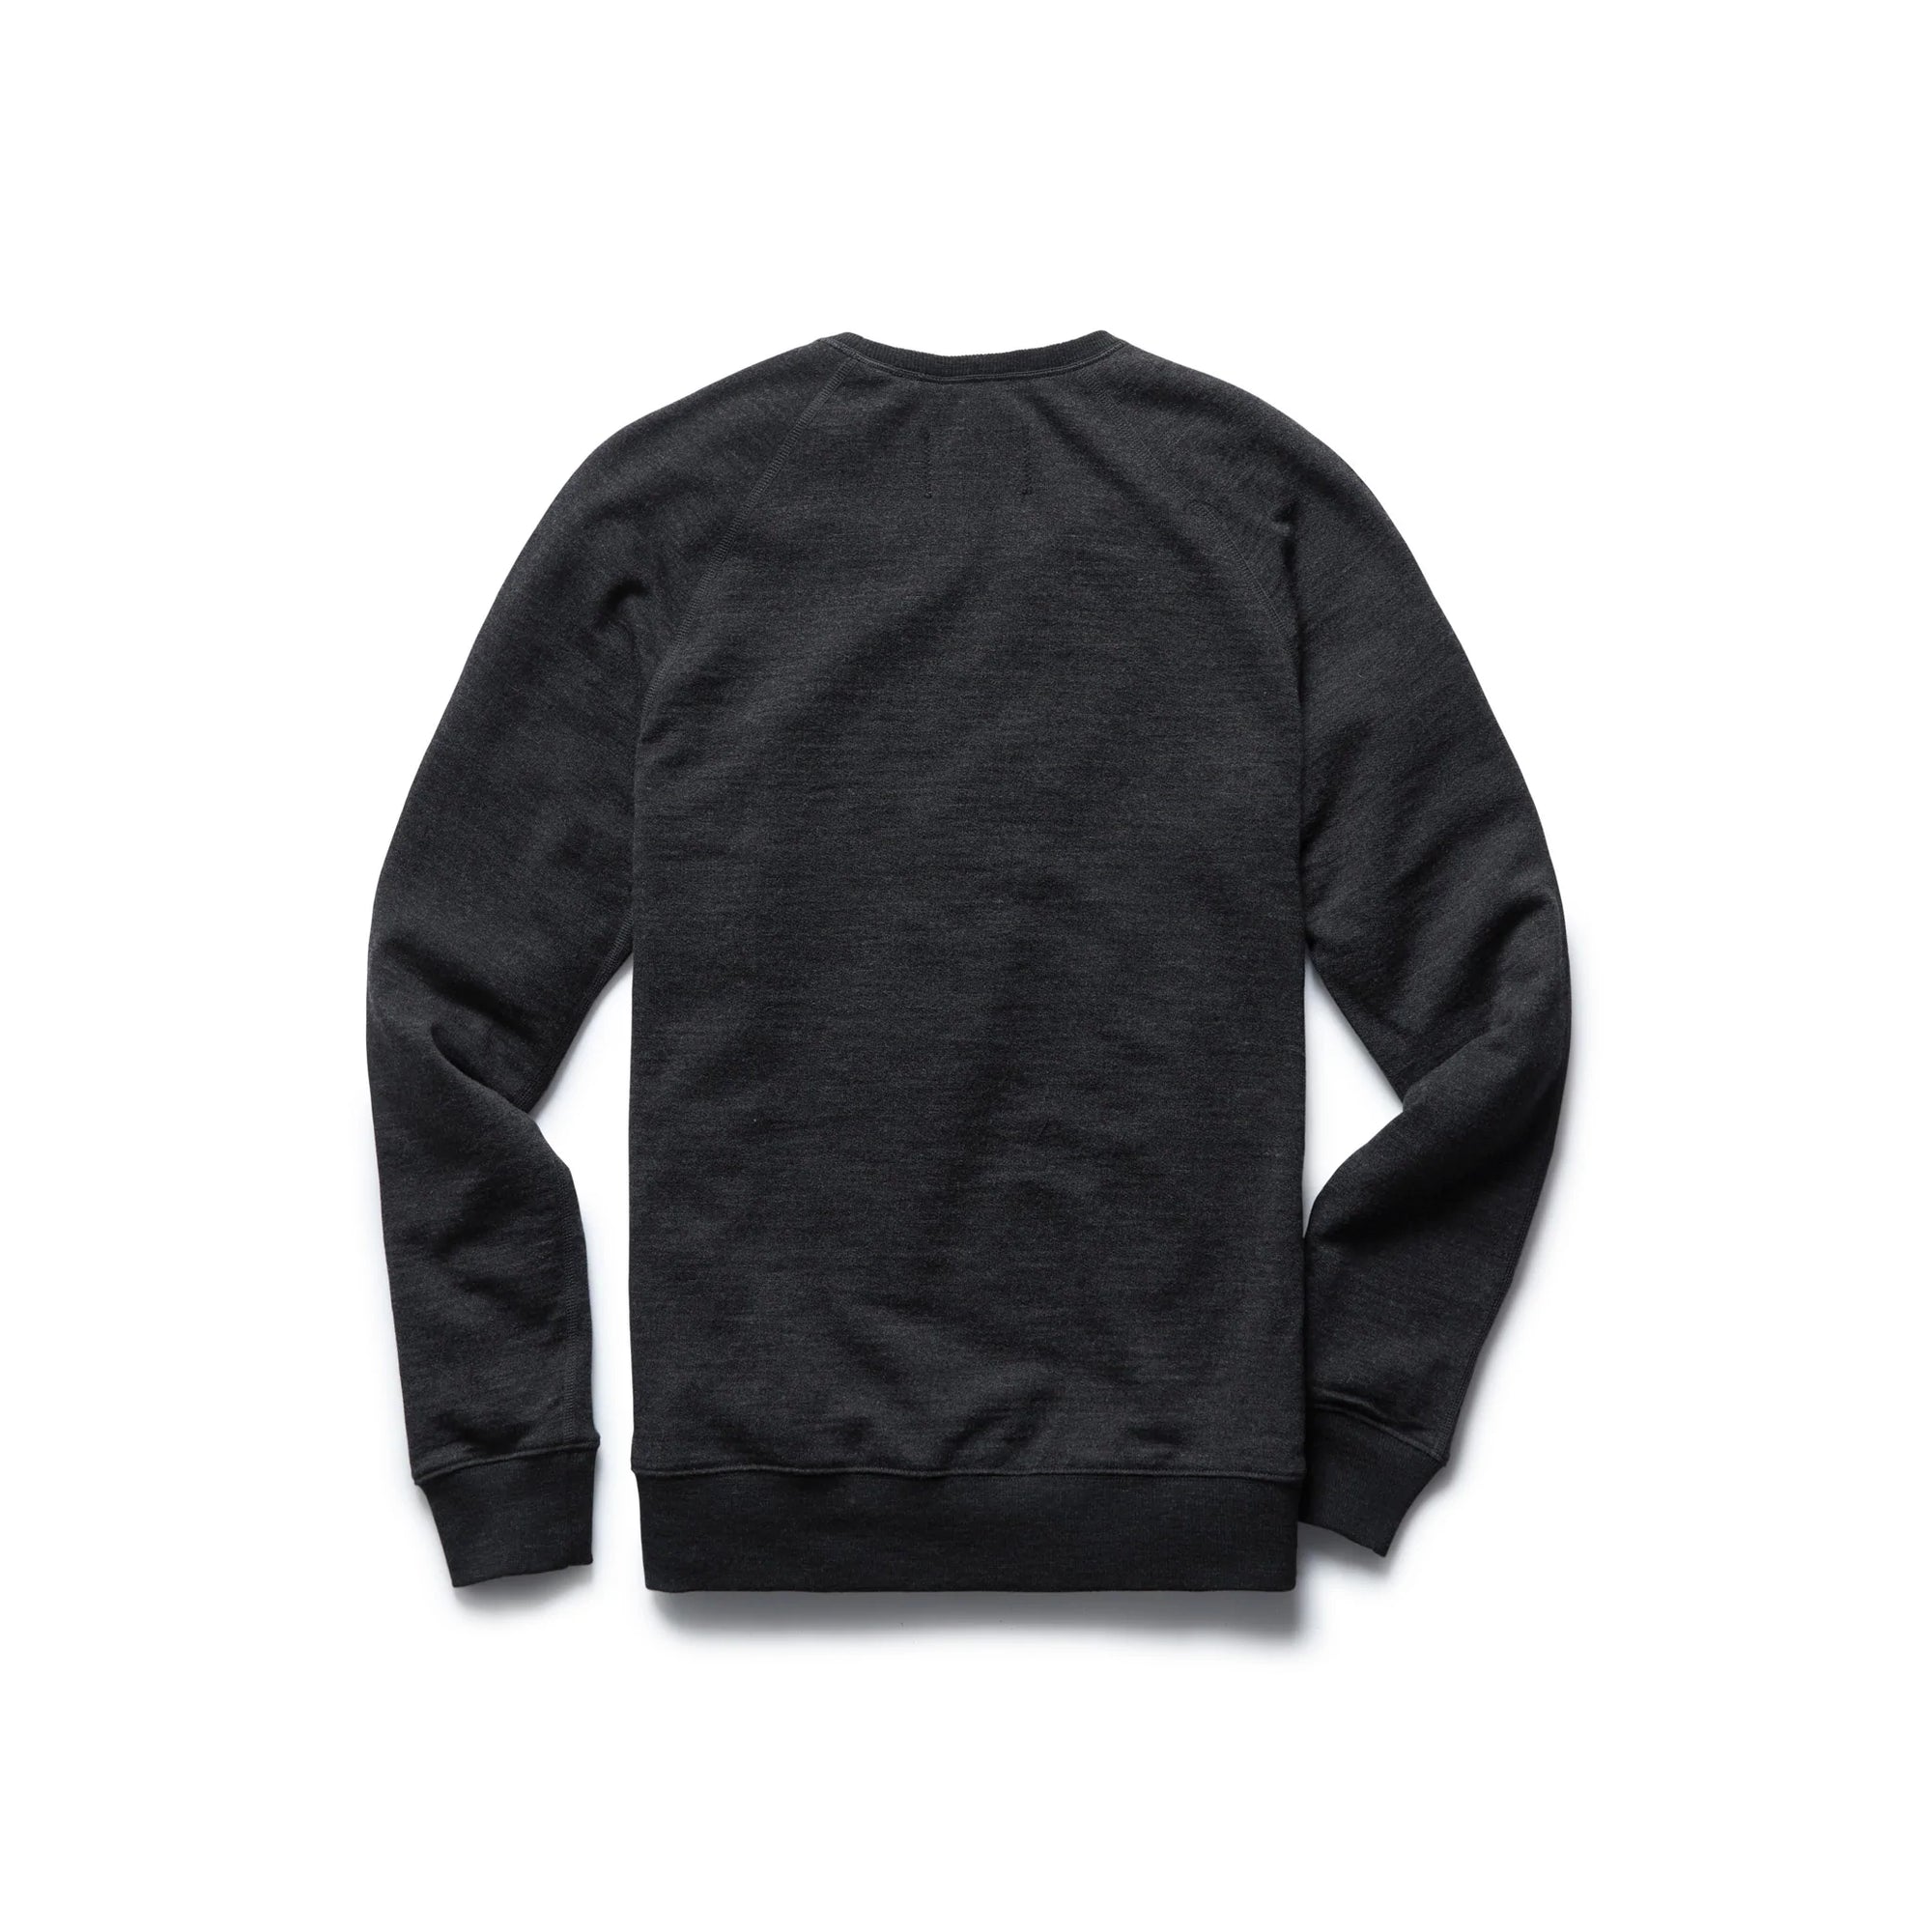 Reigning Champ Merino Terry Crewneck in Charcoal